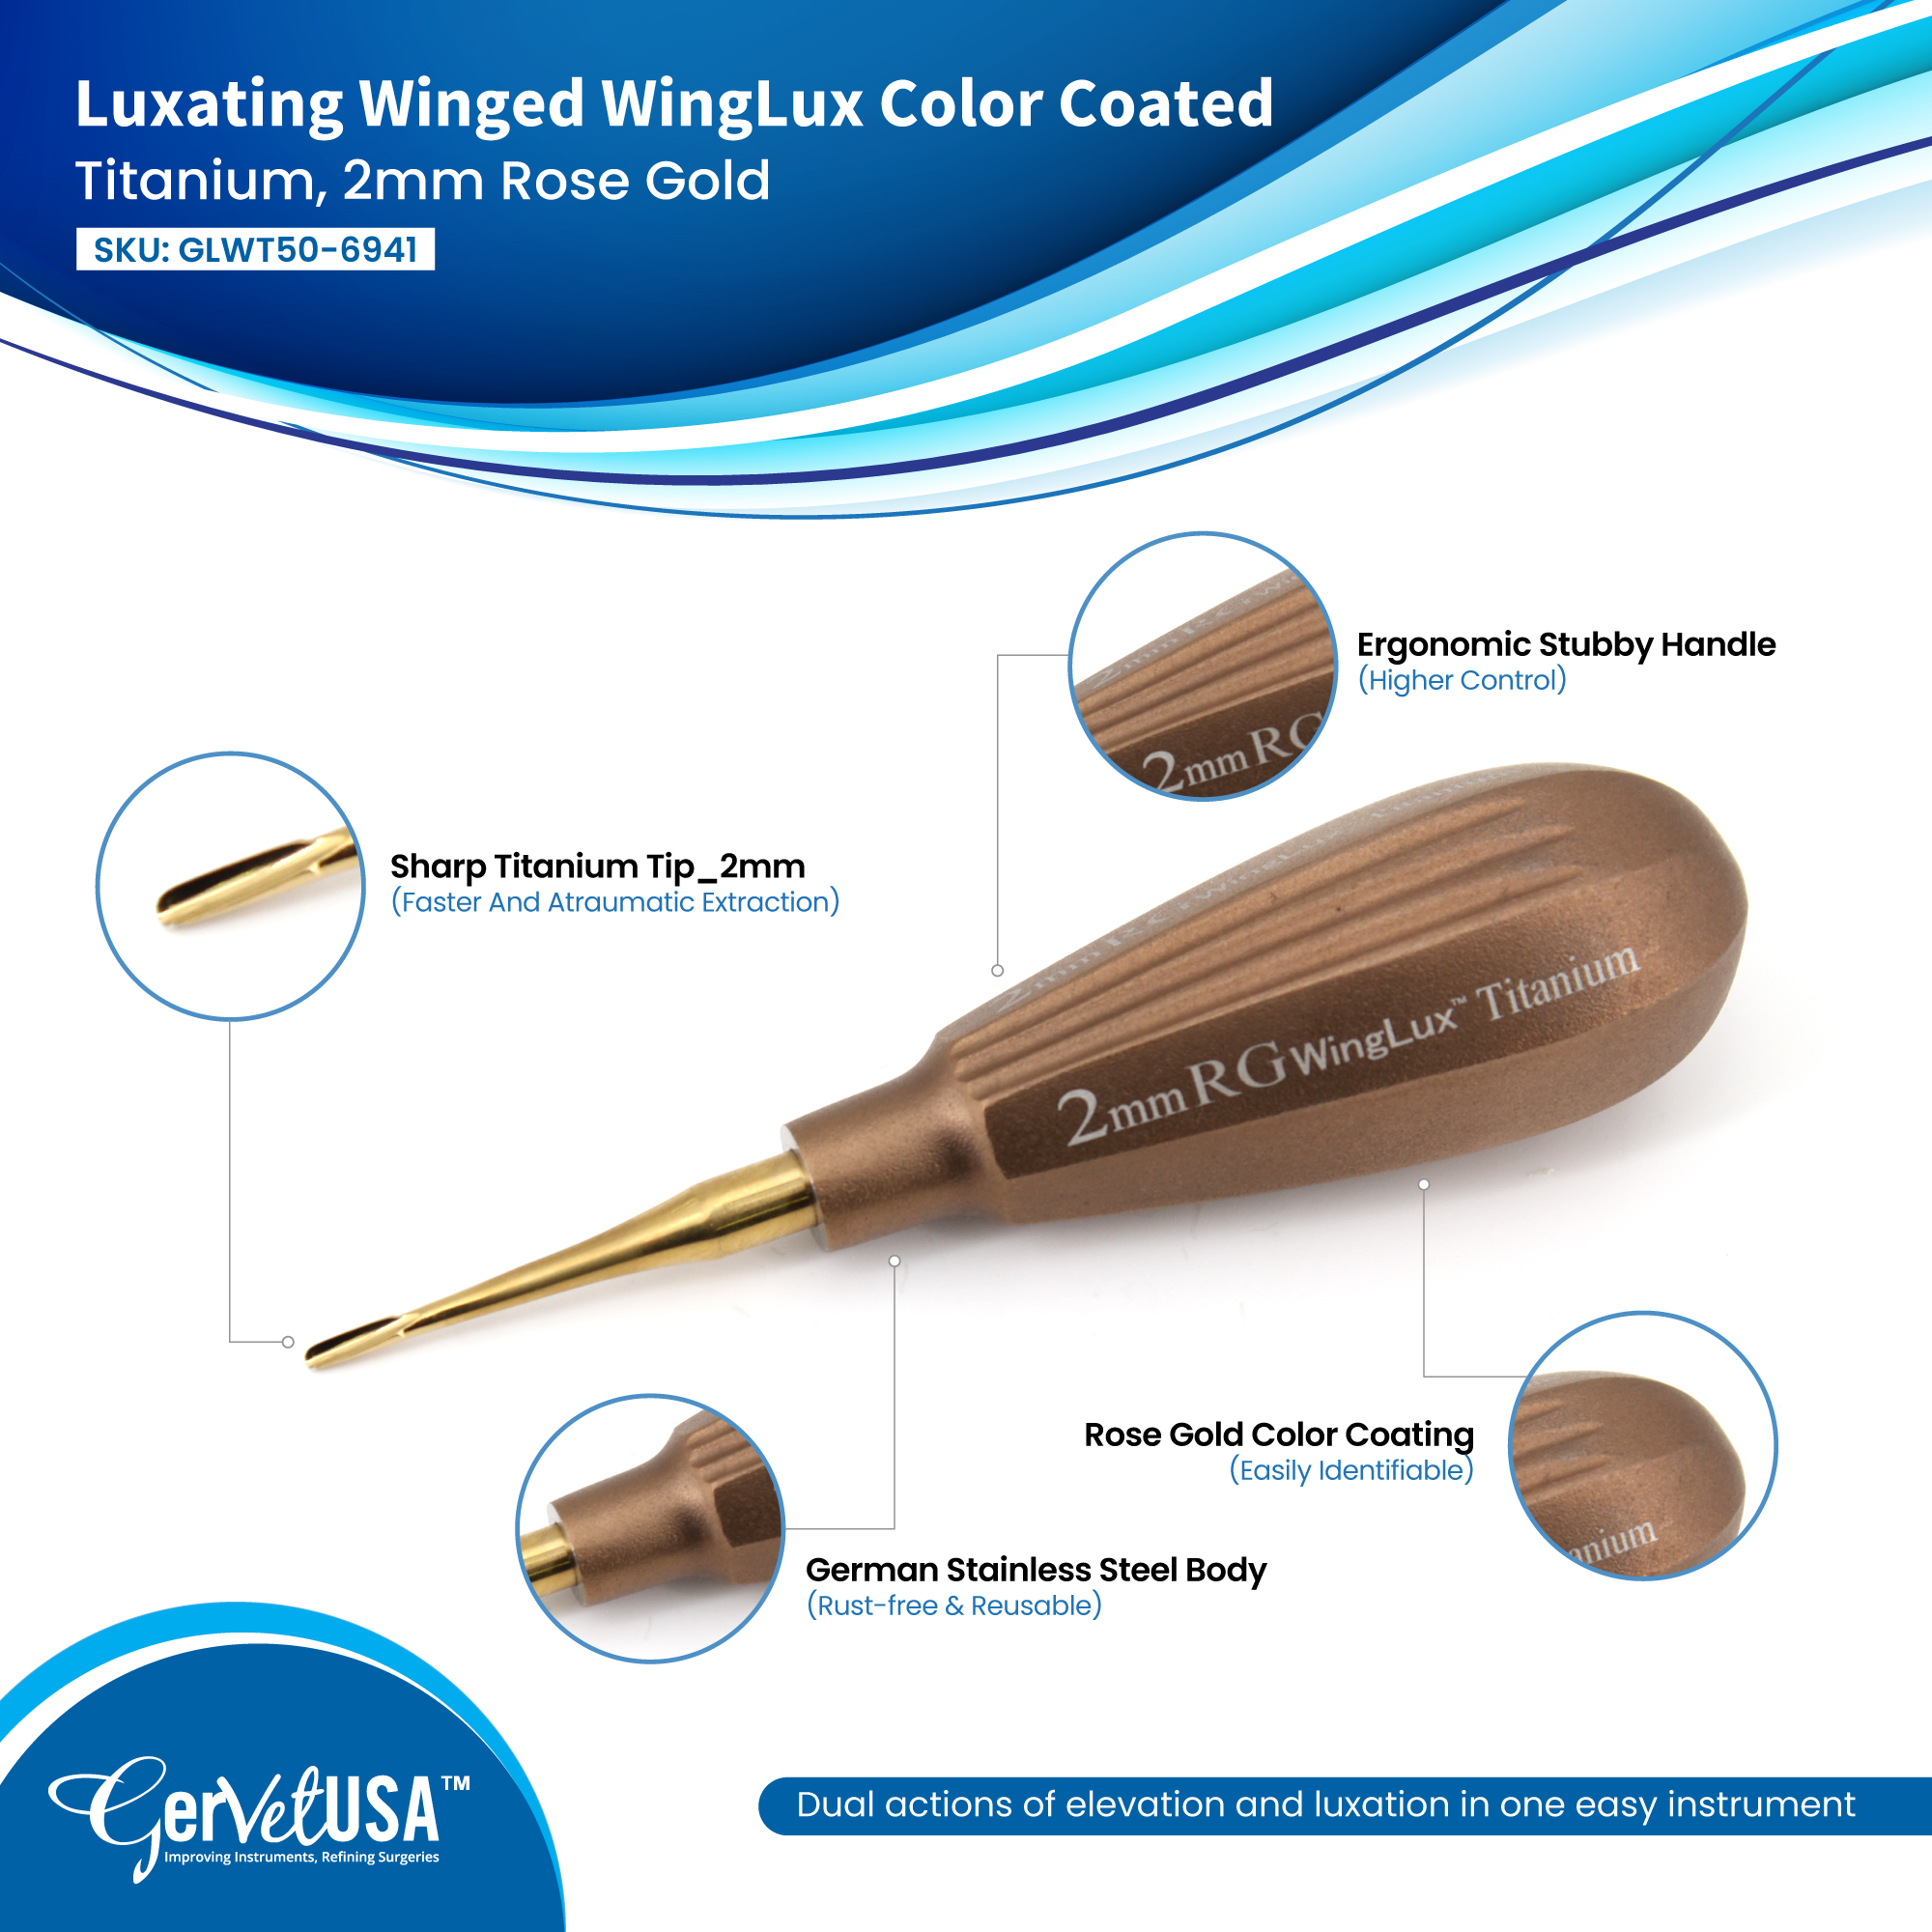 Luxating Winged WingLux Color Coated Titanium, 2mm Rose Gold